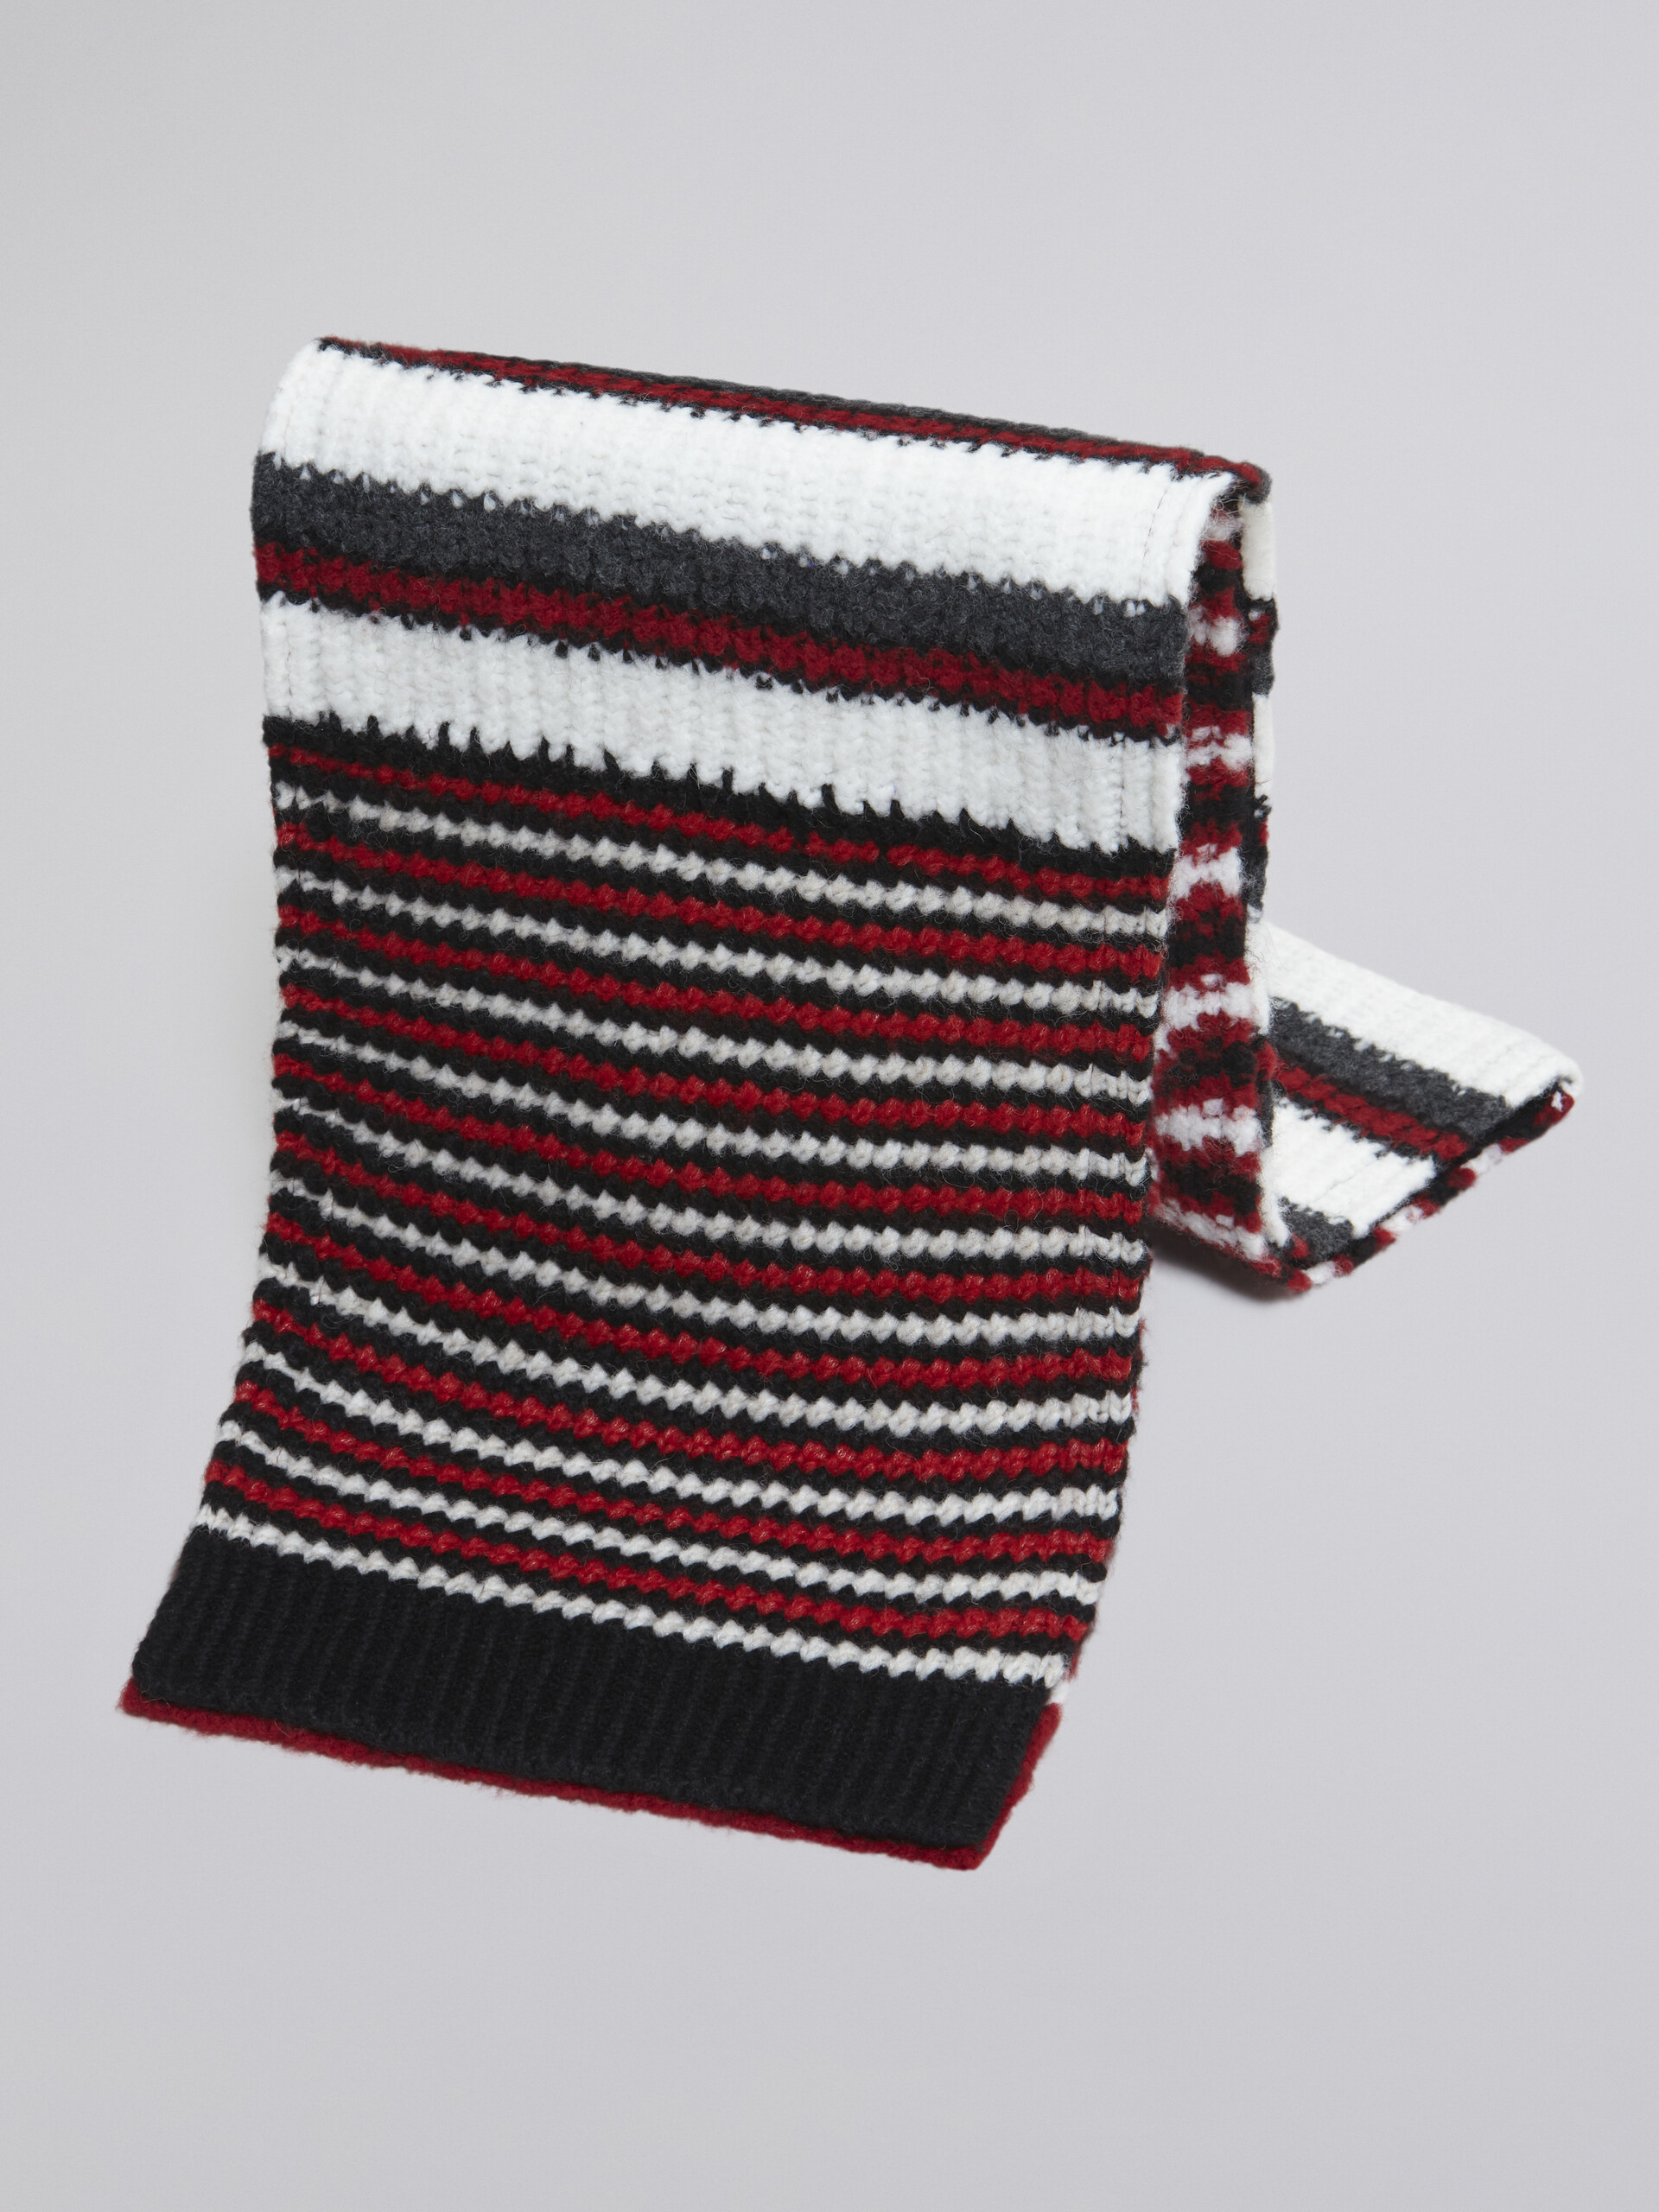 Techno yarns and wool scarf - Scarves - Image 3